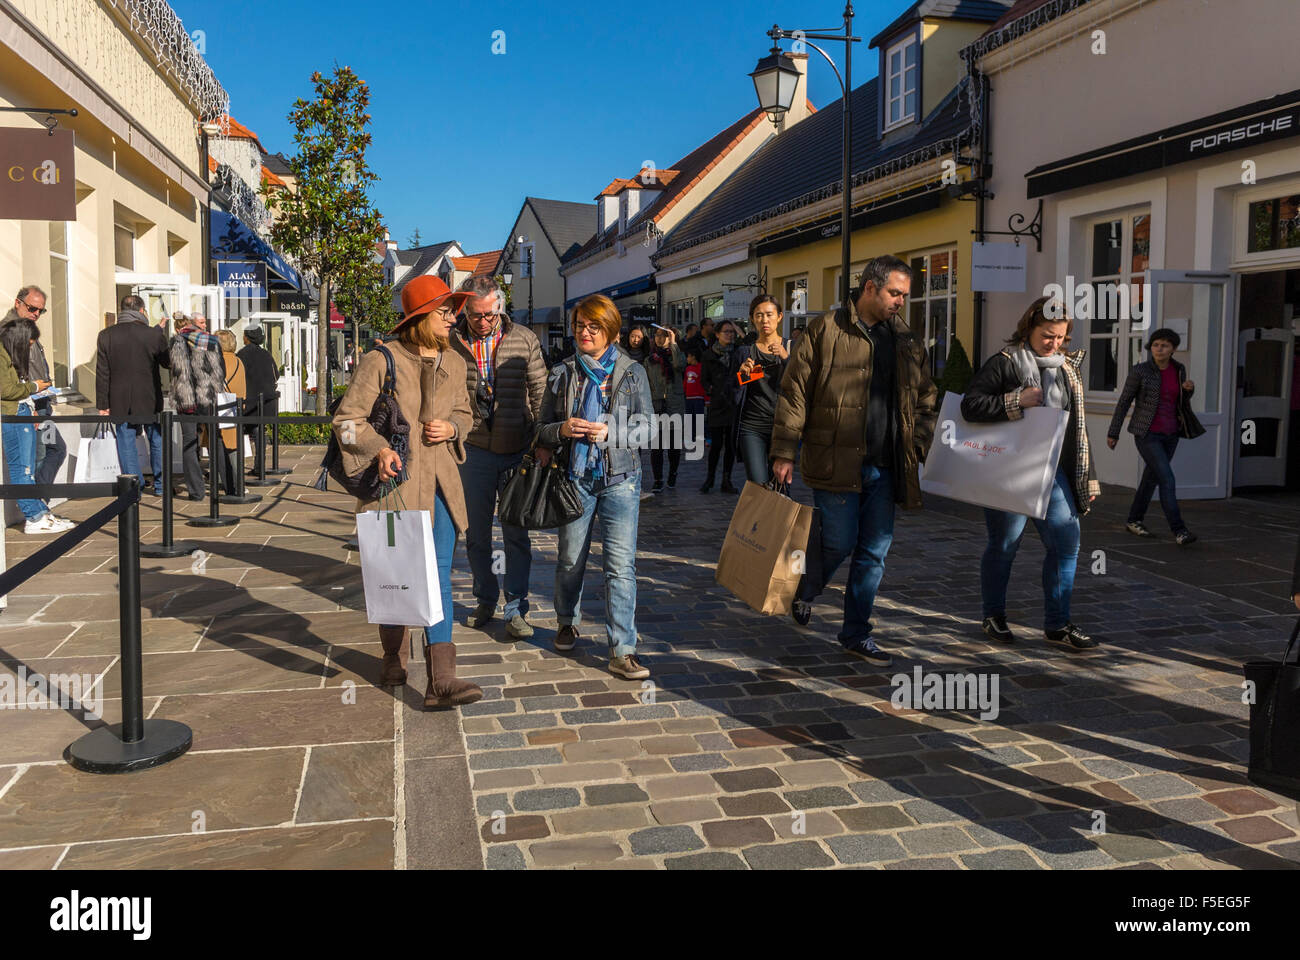 Paris, France, Crowd of People Walking, Shopping in Luxury Stores in "La Vallee  Village", Discount Shops, Busy Street Scene Stock Photo - Alamy